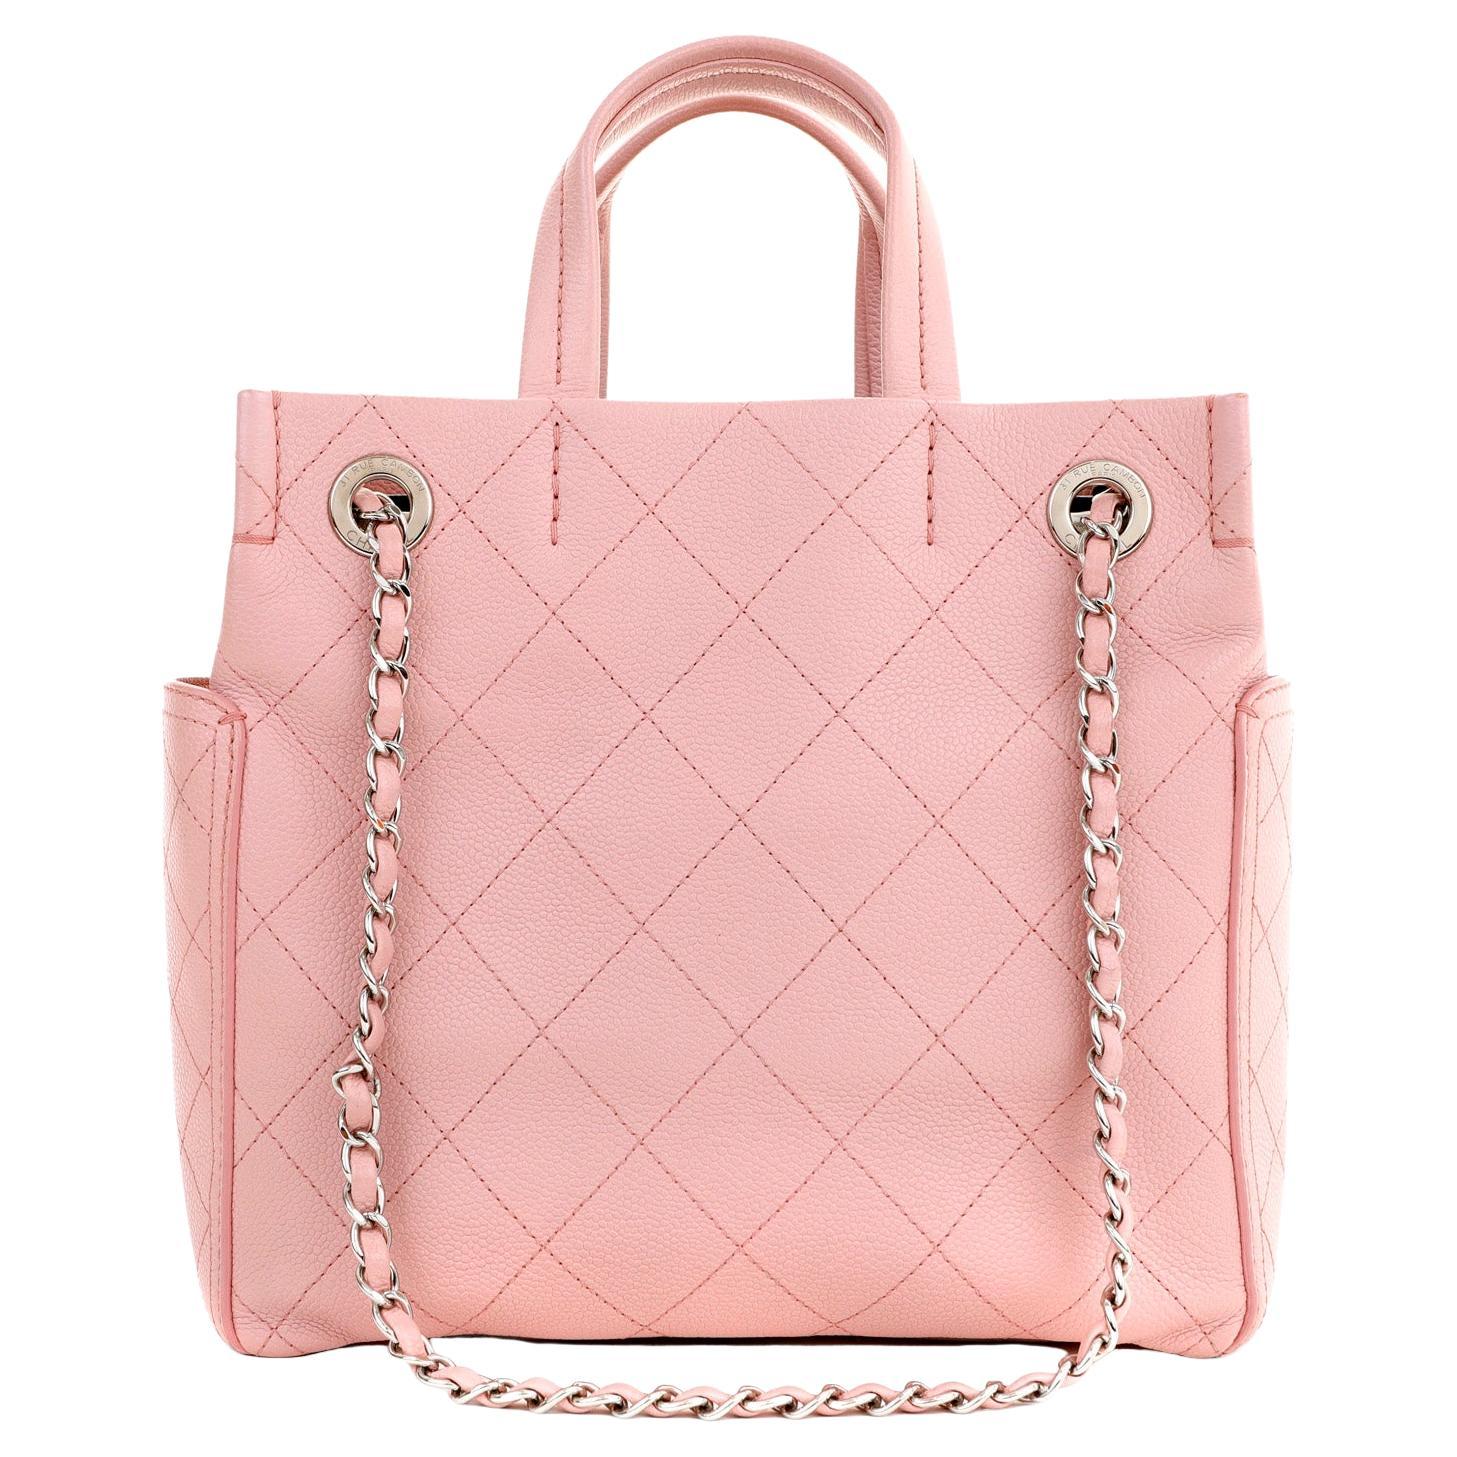 Chanel Pink Caviar Leather Day Tote